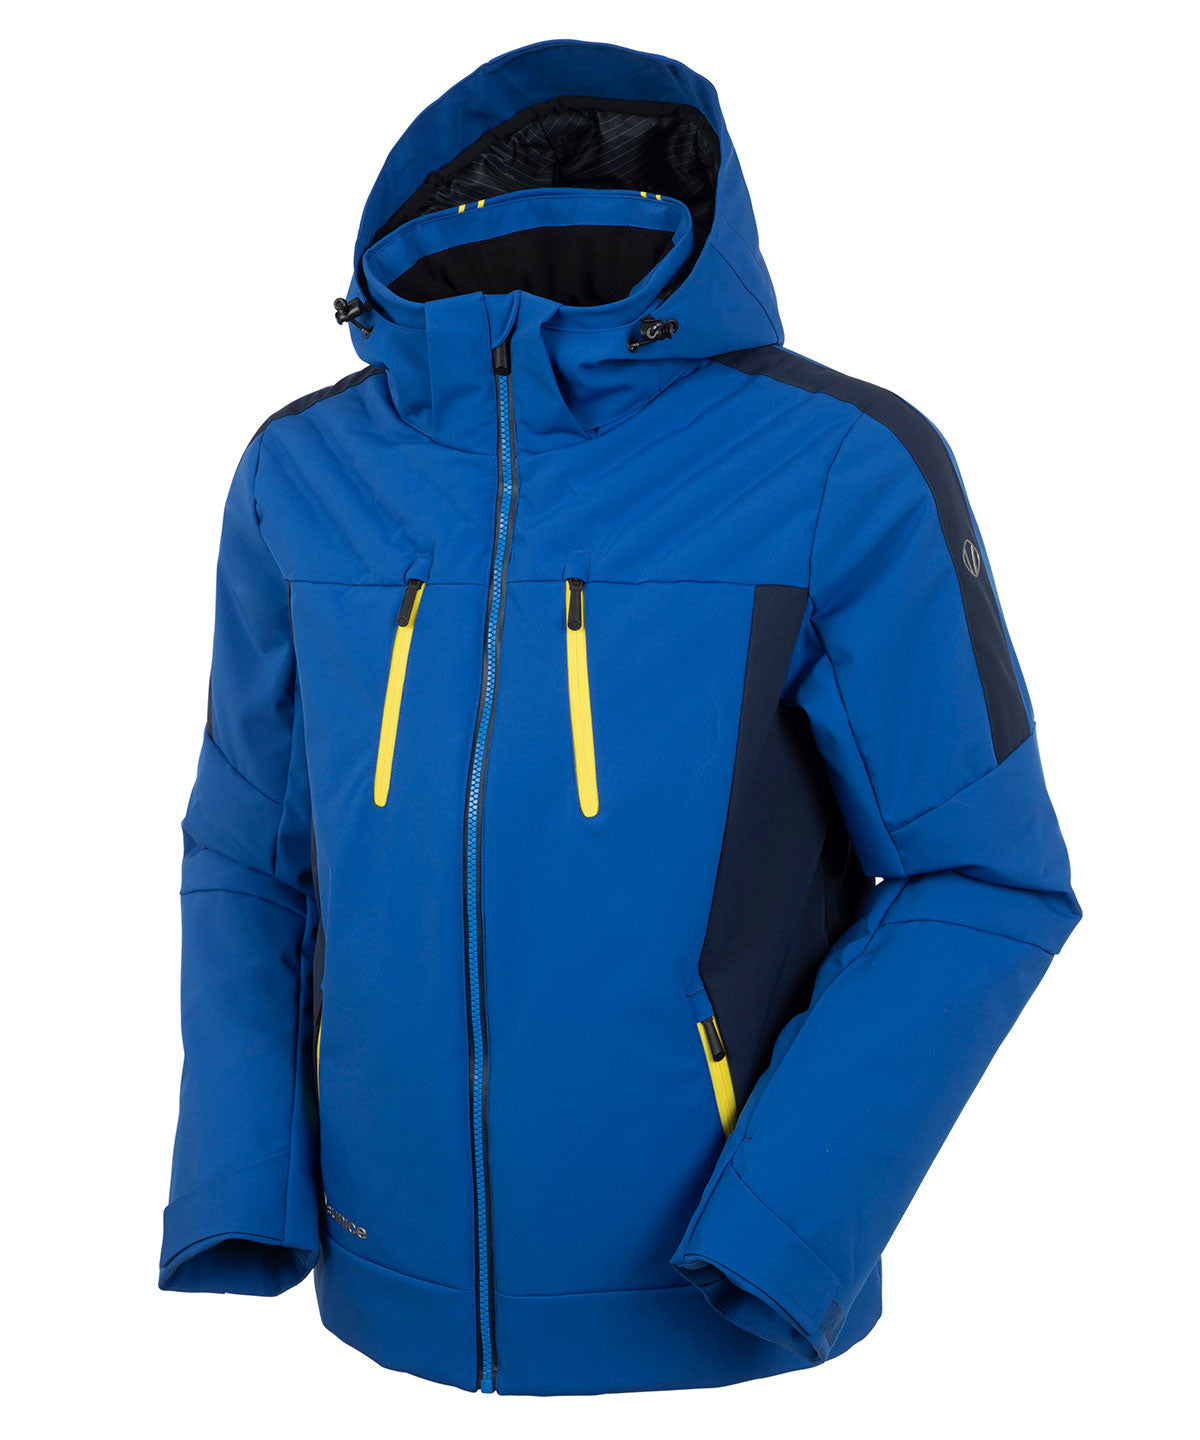 Men's Paul Waterproof Stretch Jacket with Removable Hood